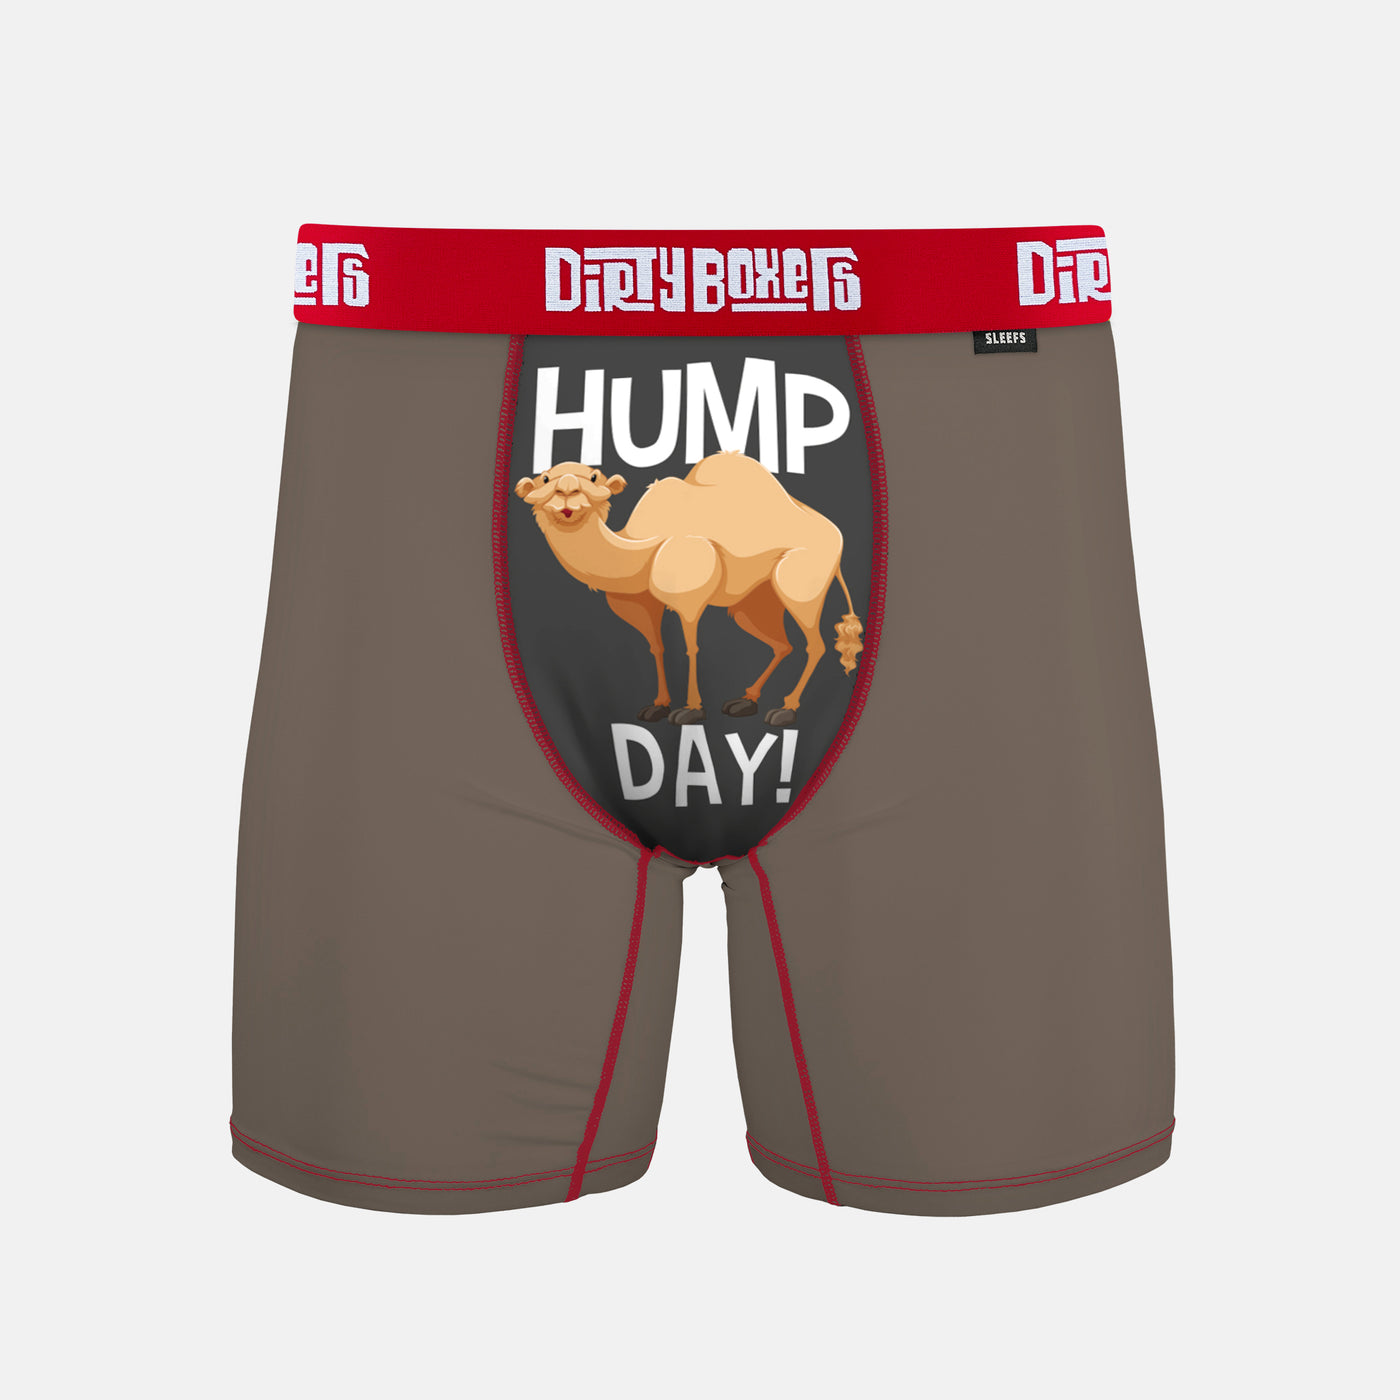 Hump Day Dirty Boxers Men's Underwear